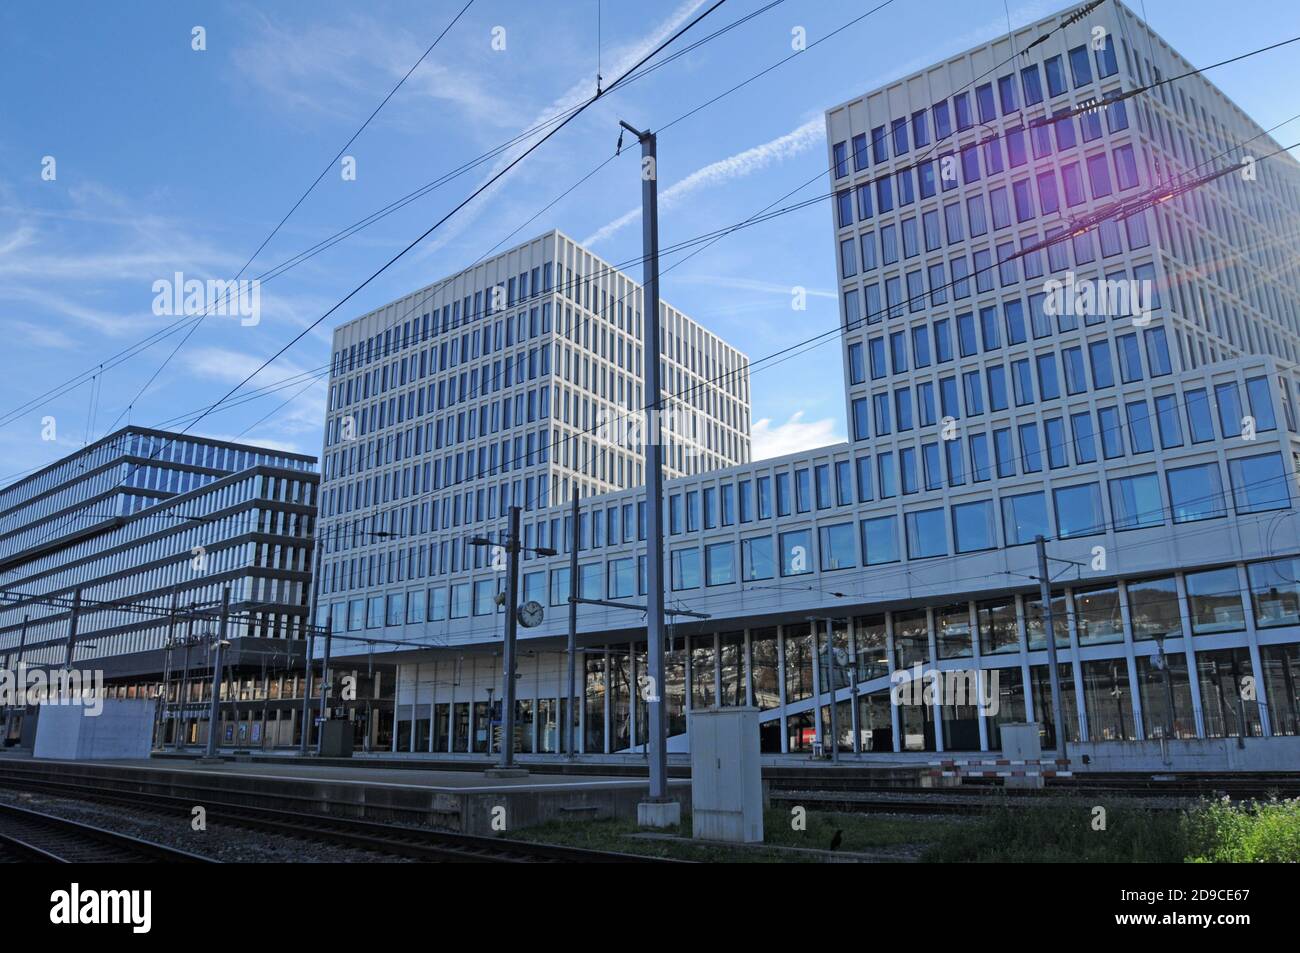 Switzerland: Zürich main station with the ugly SBB buildings along the railway tracks at Europa-Allee Stock Photo